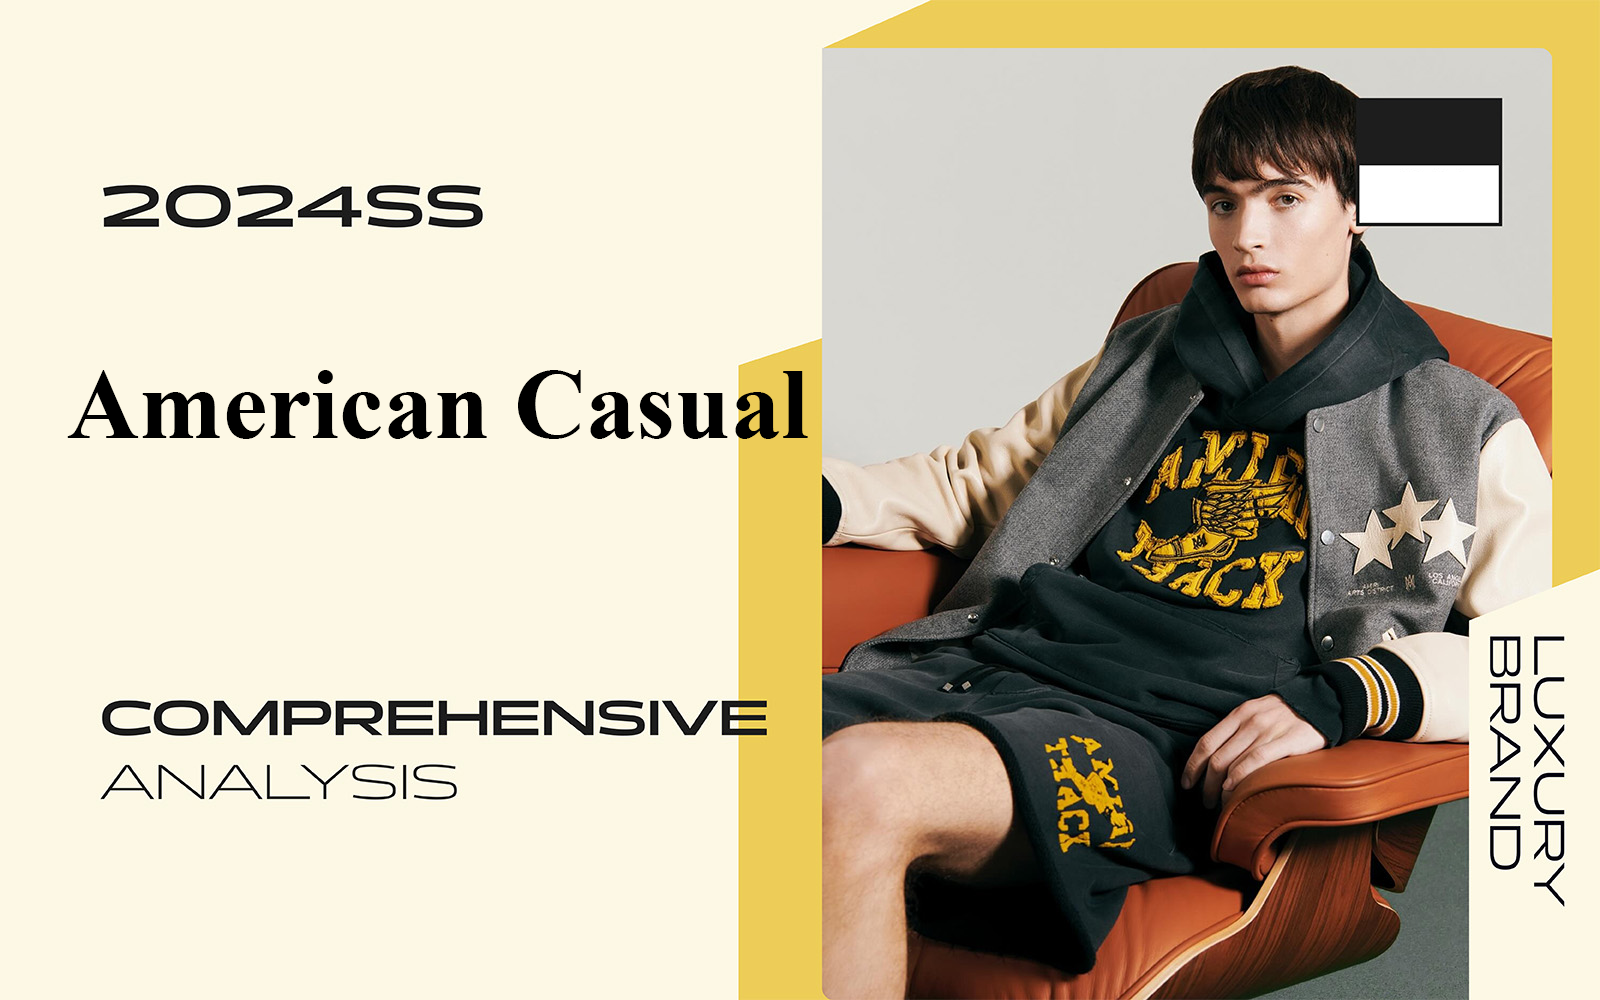 American Casual -- The Comprehensive Analysis of Luxury Brands